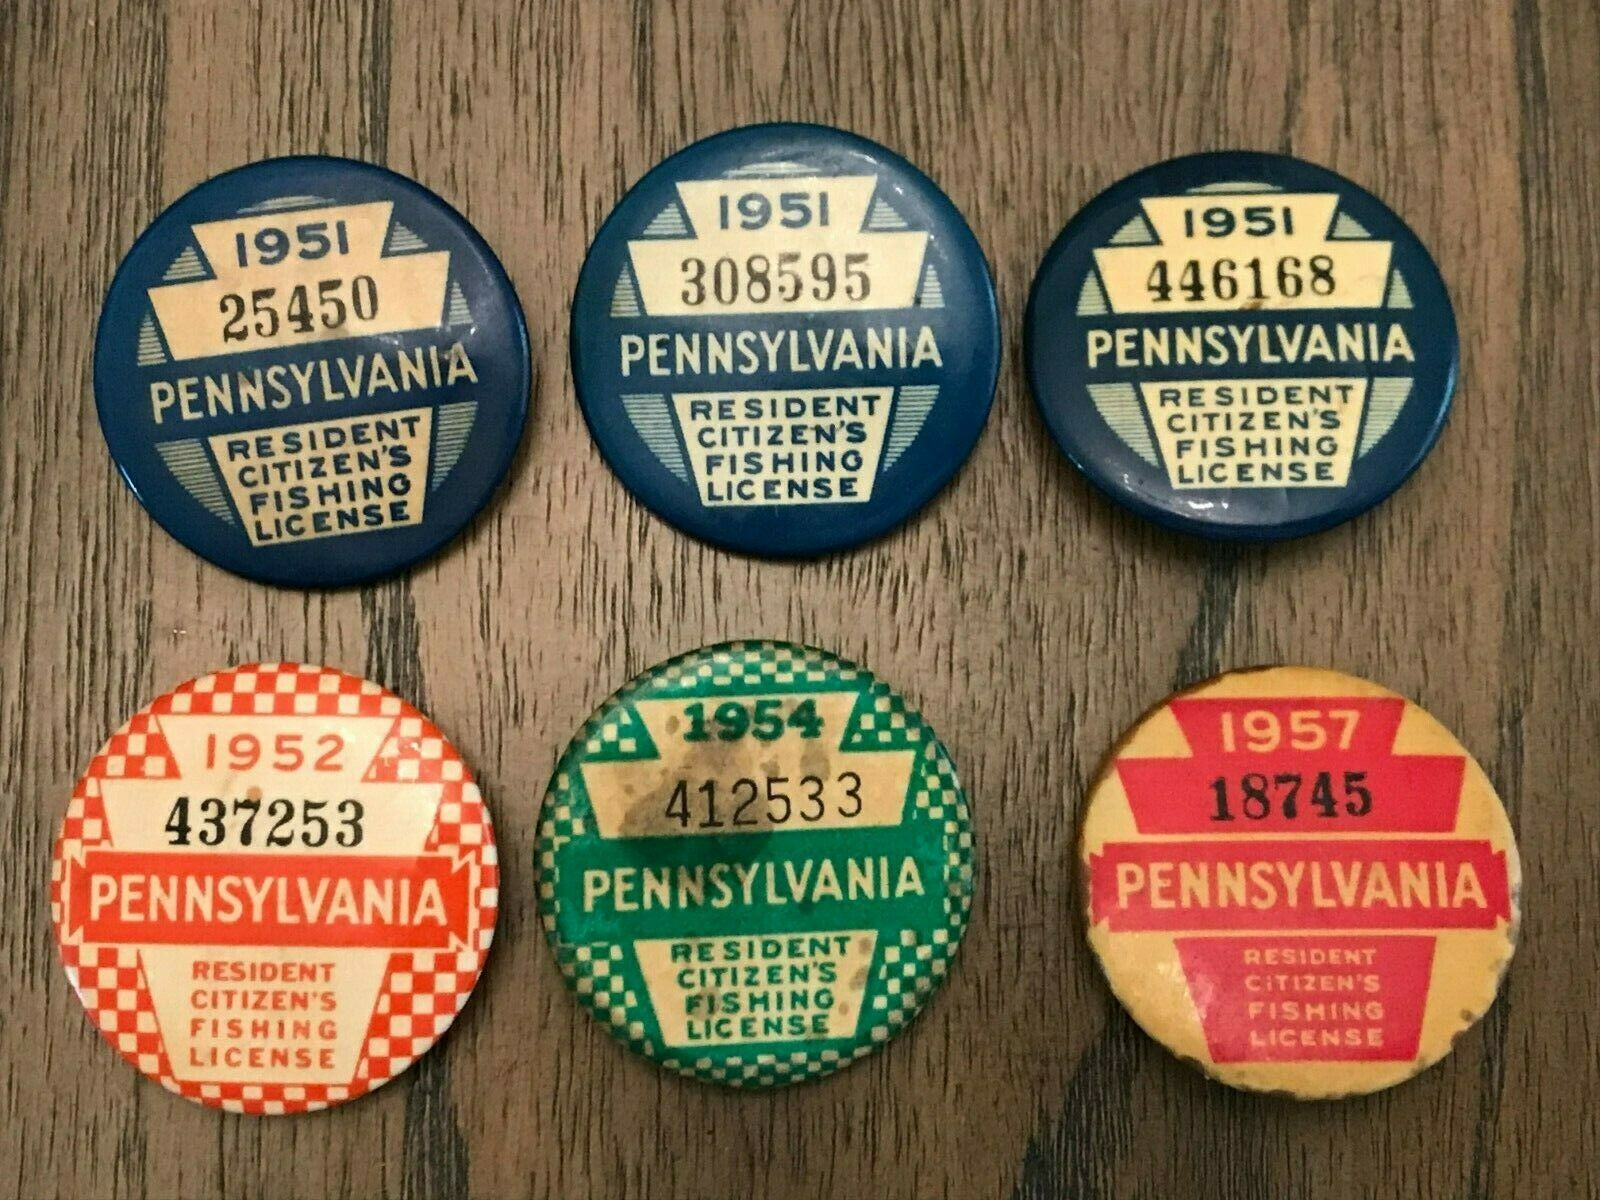 Six Pennsylvania Resident Citizens Fishing License Buttons 1951, 52, 54, 57 Pin